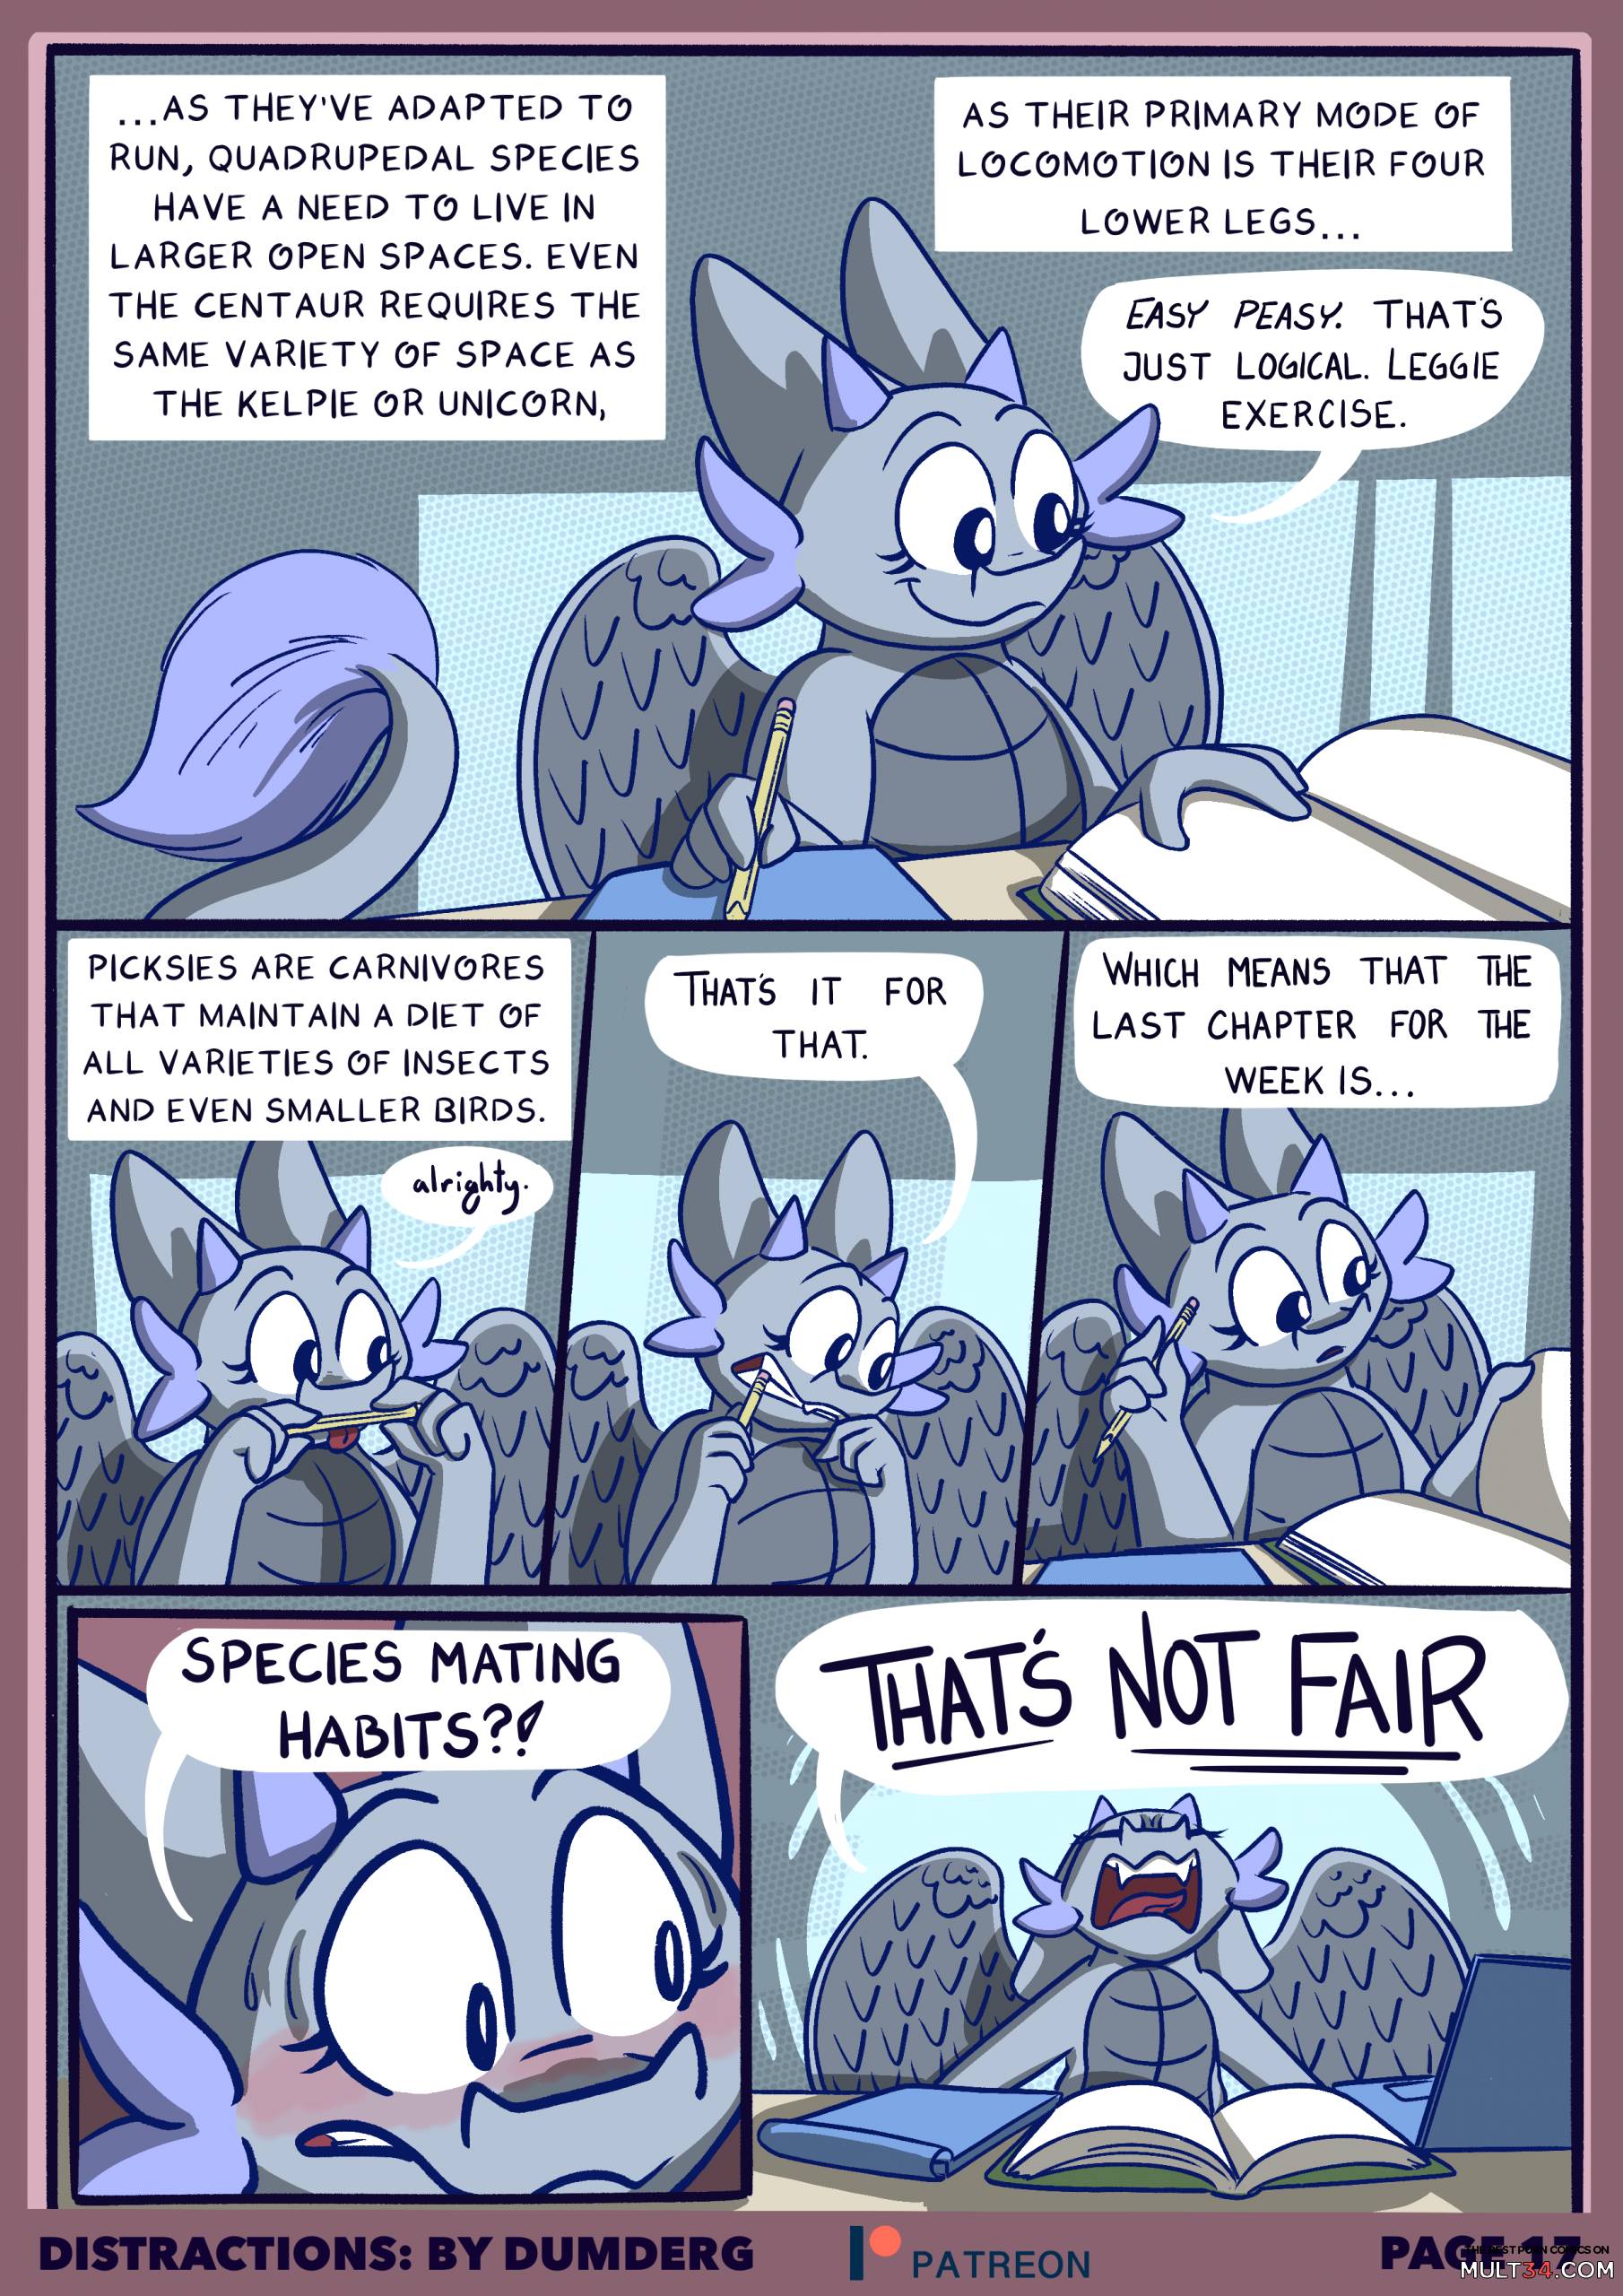 Distractions - DumDerg page 18